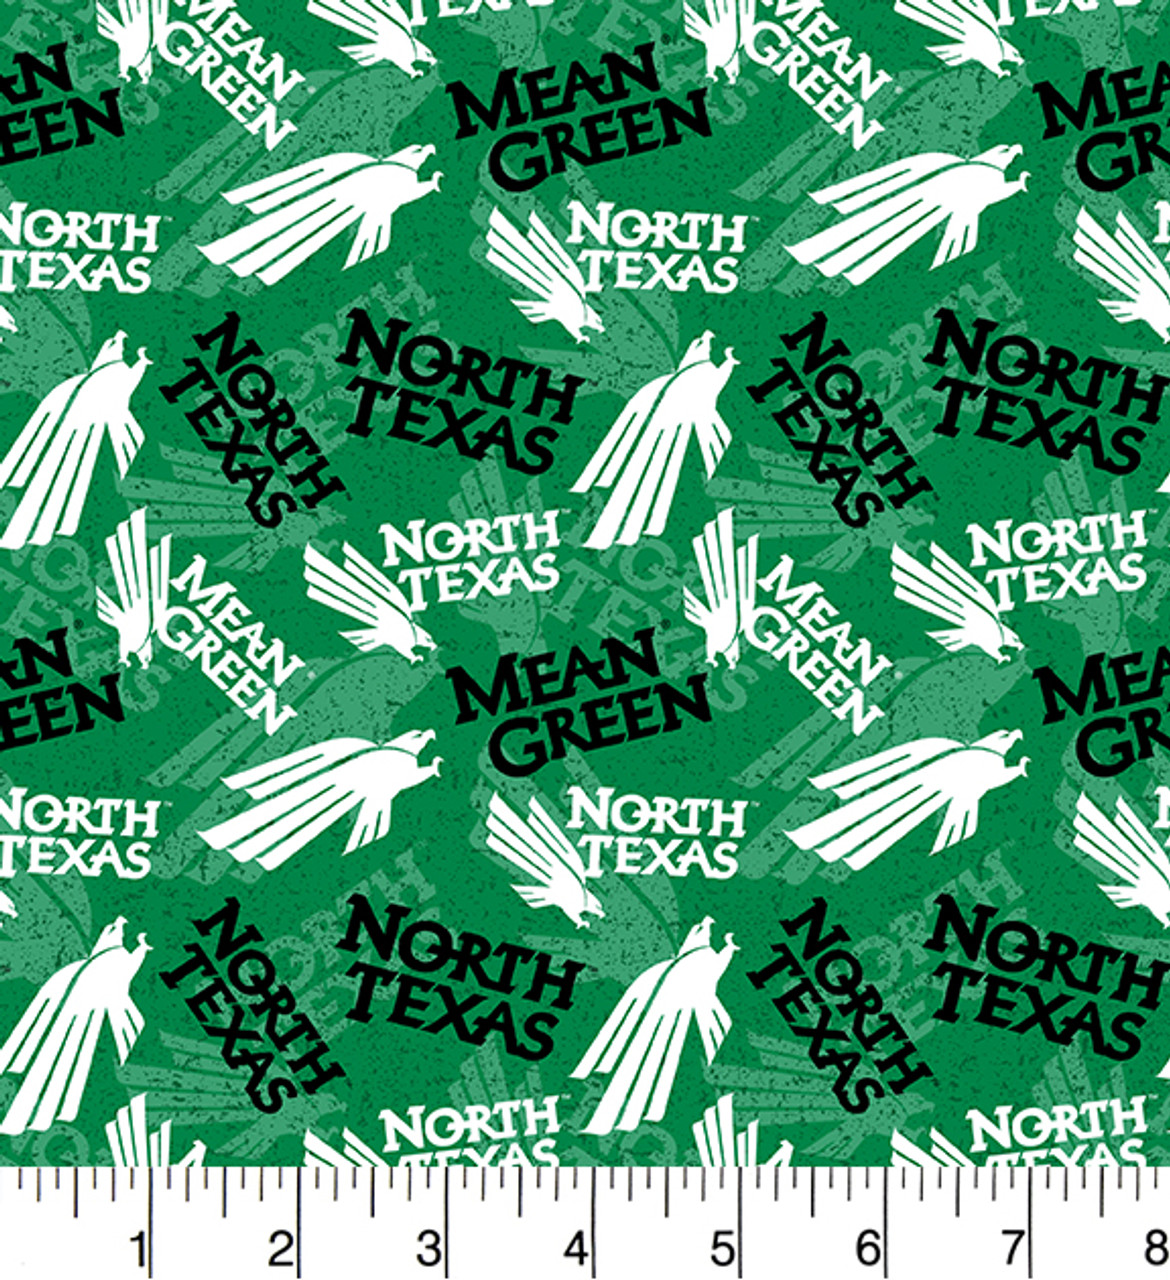 University of North Texas Mean Green Cotton Fabric with Tone On Tone Print or Matching Solid Cotton Fabrics